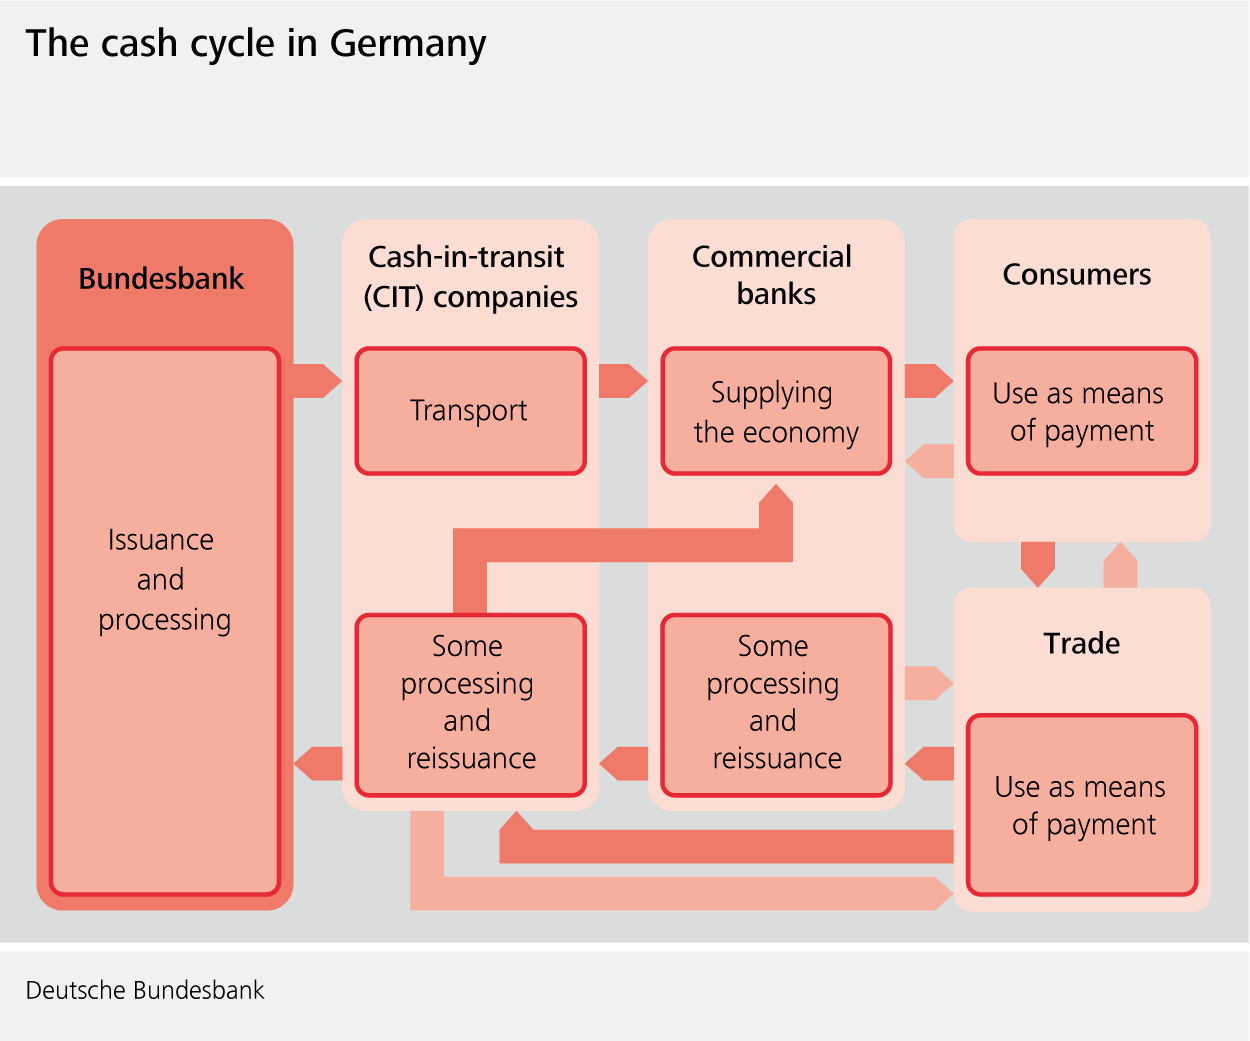 The cash cycle in Germany